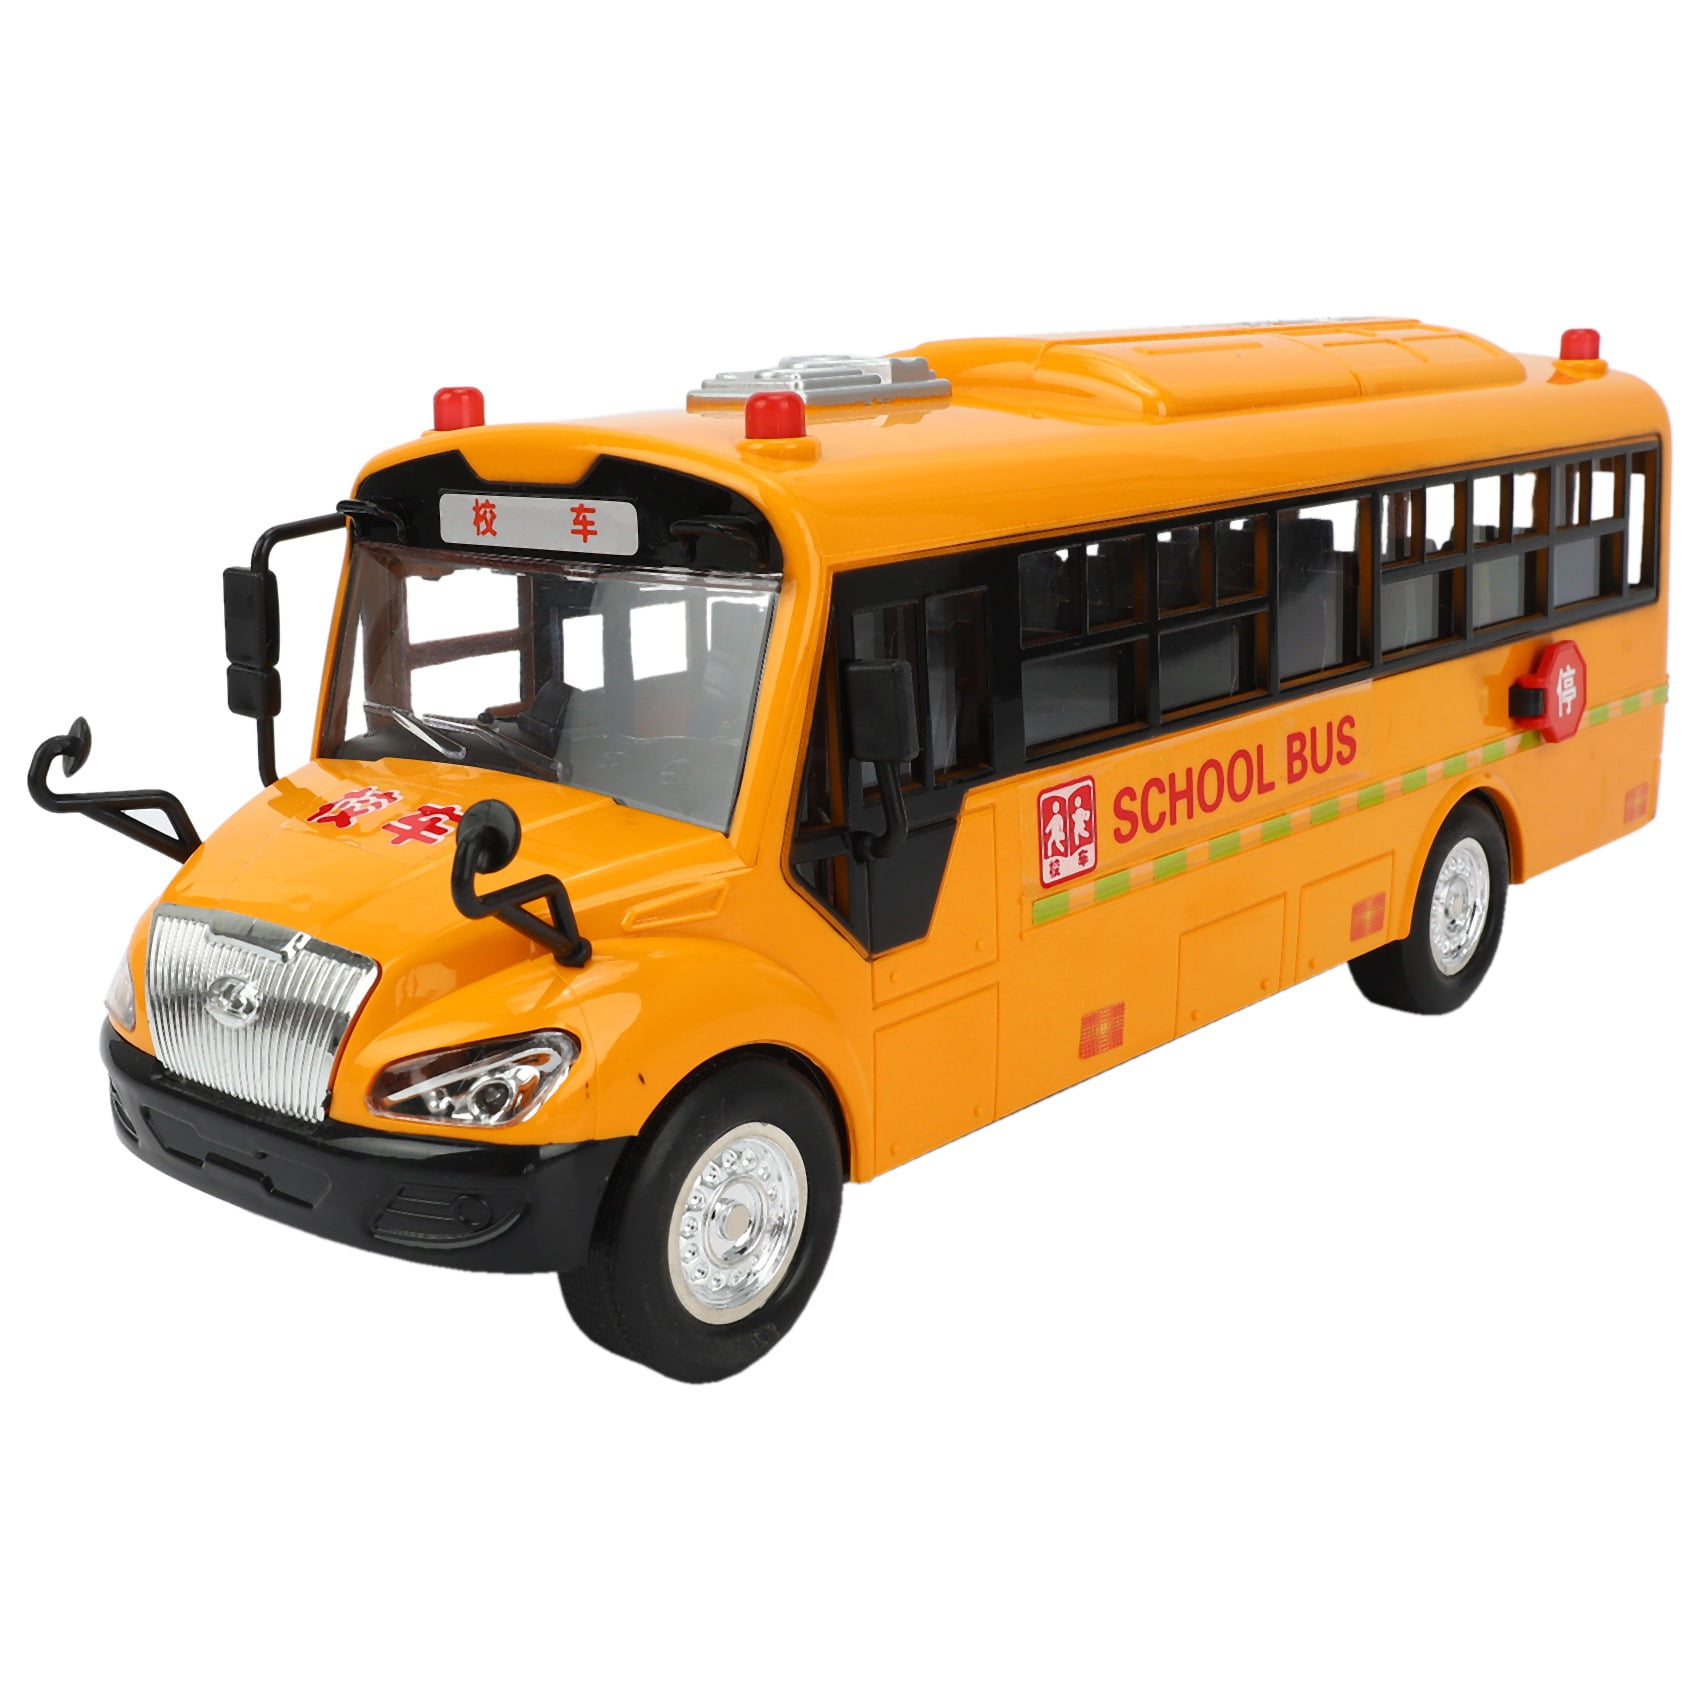 School Bus Toy Big Size Model Inertia Car with Sound Light for Kids Toy 